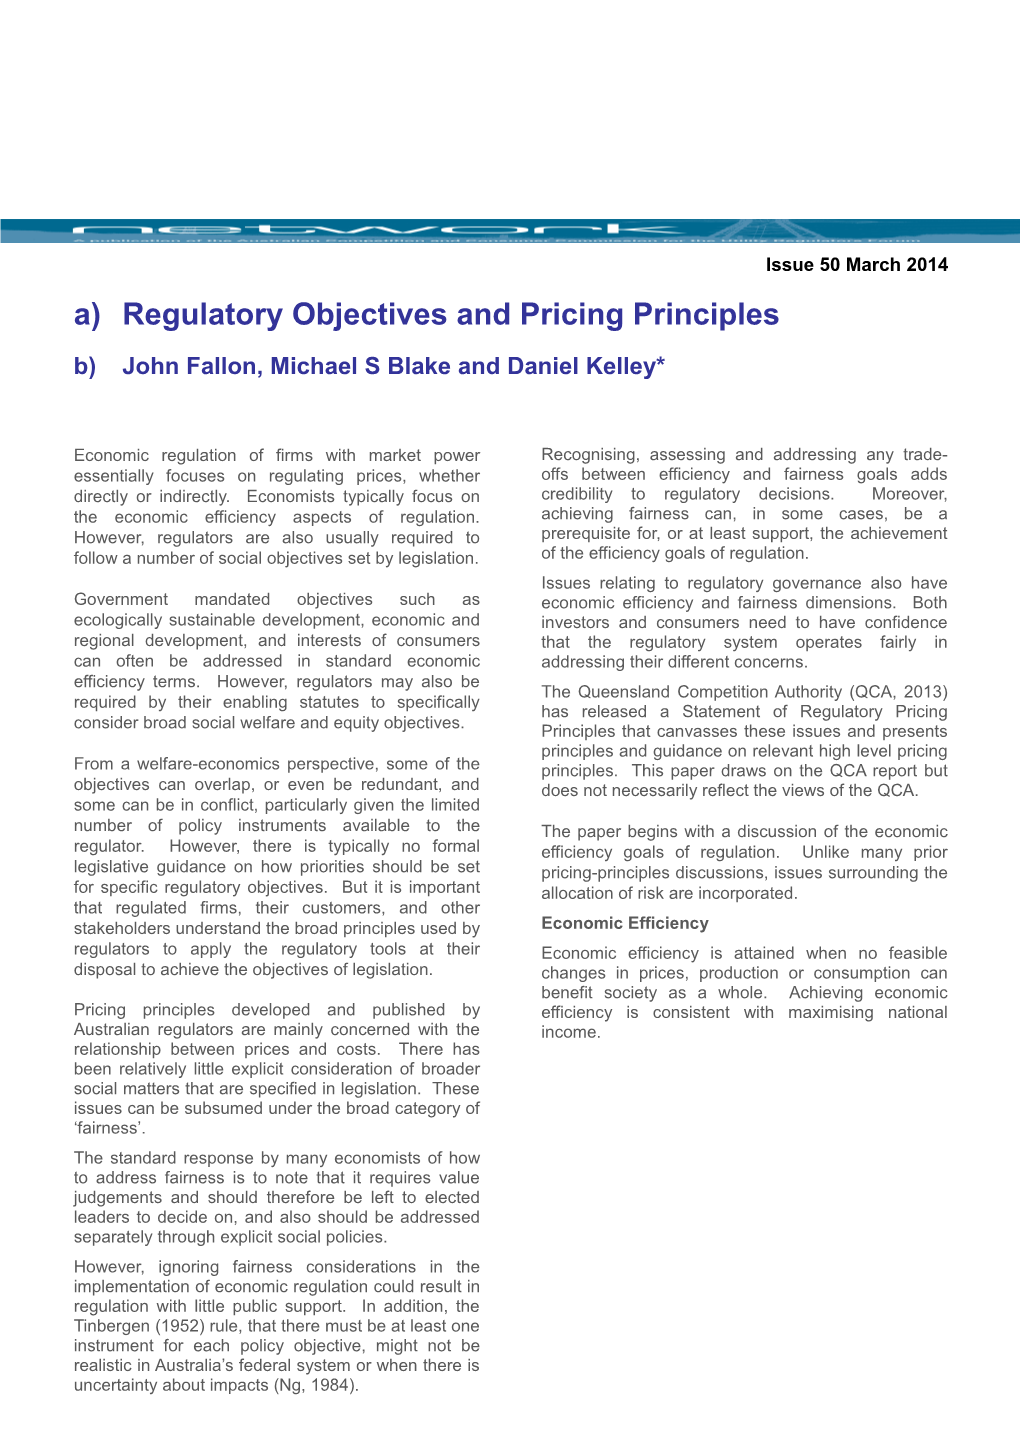 Regulatory Objectives and Pricing Principles